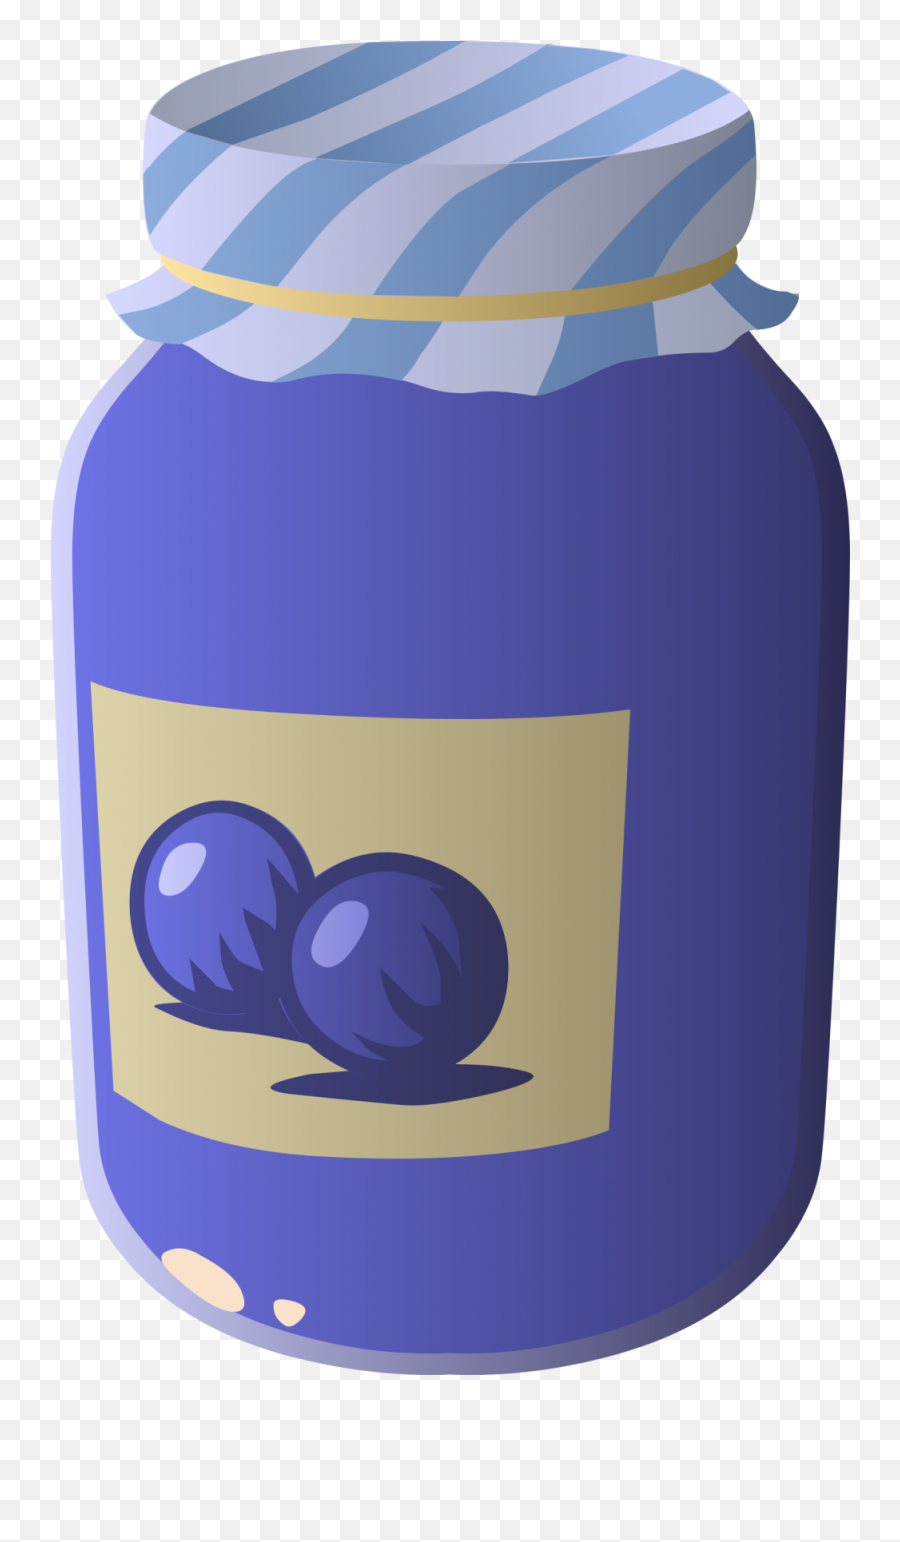 Jelly Png Image For Designing Projects - Blueberry Jam Clipart Png,Jelly Jar Png